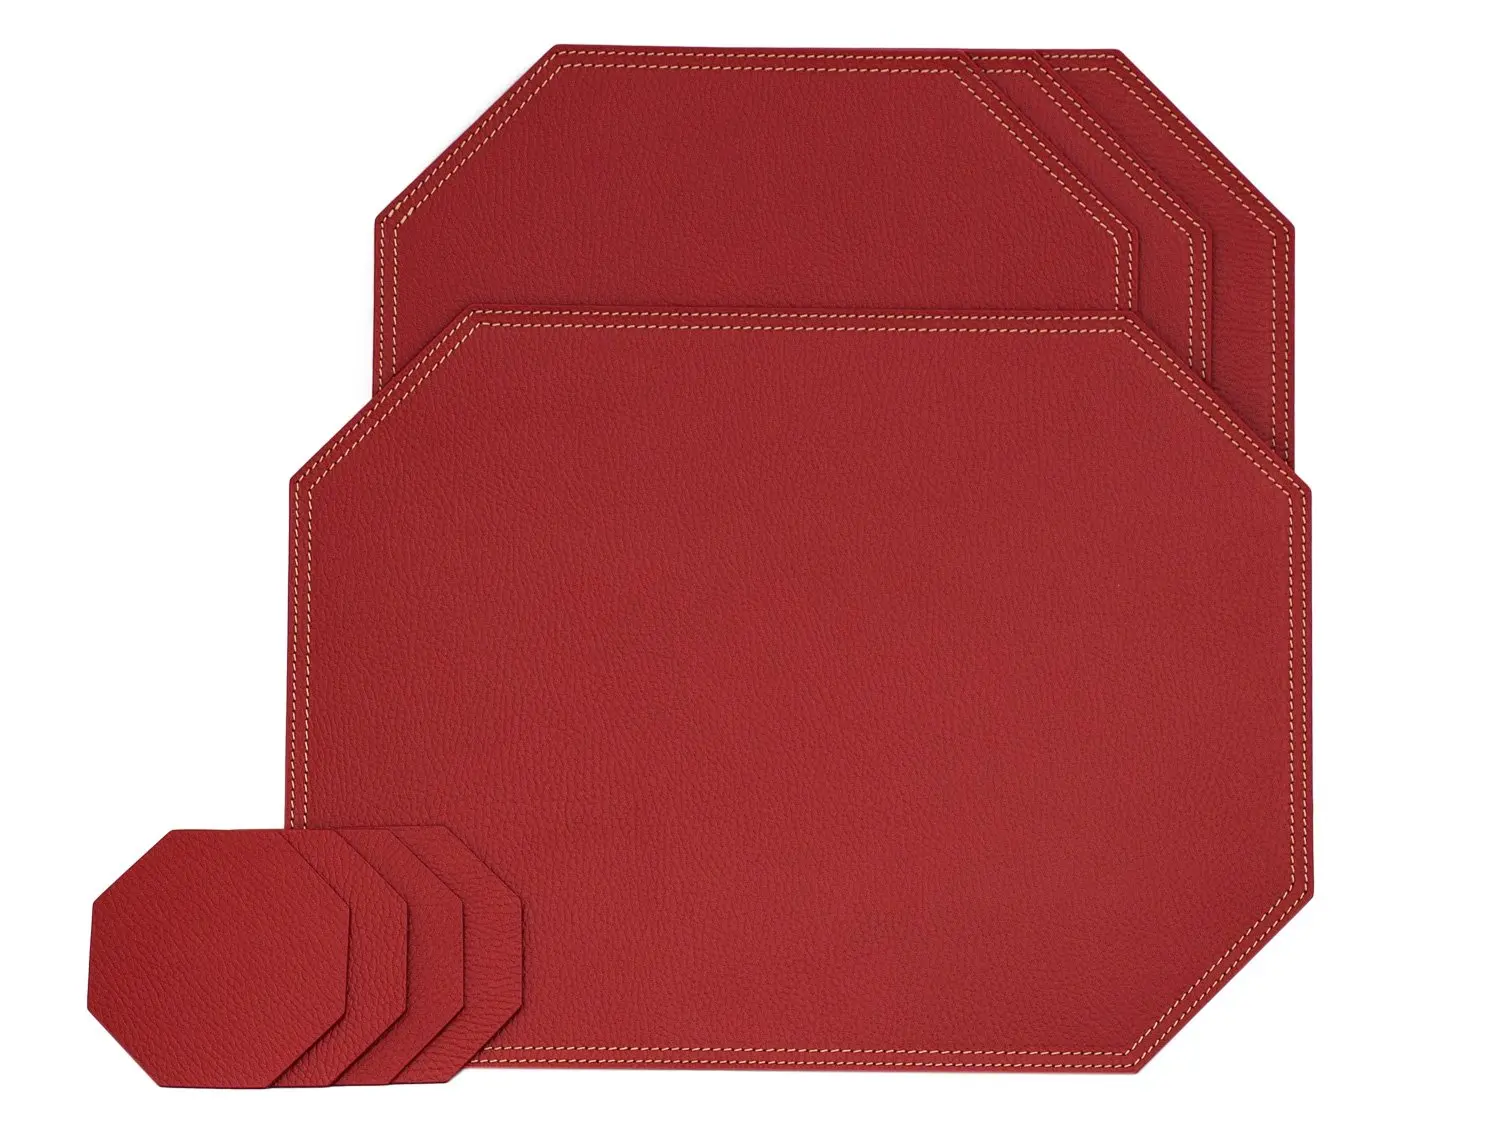 Cheap Round Table Mats And Coasters, find Round Table Mats And Coasters